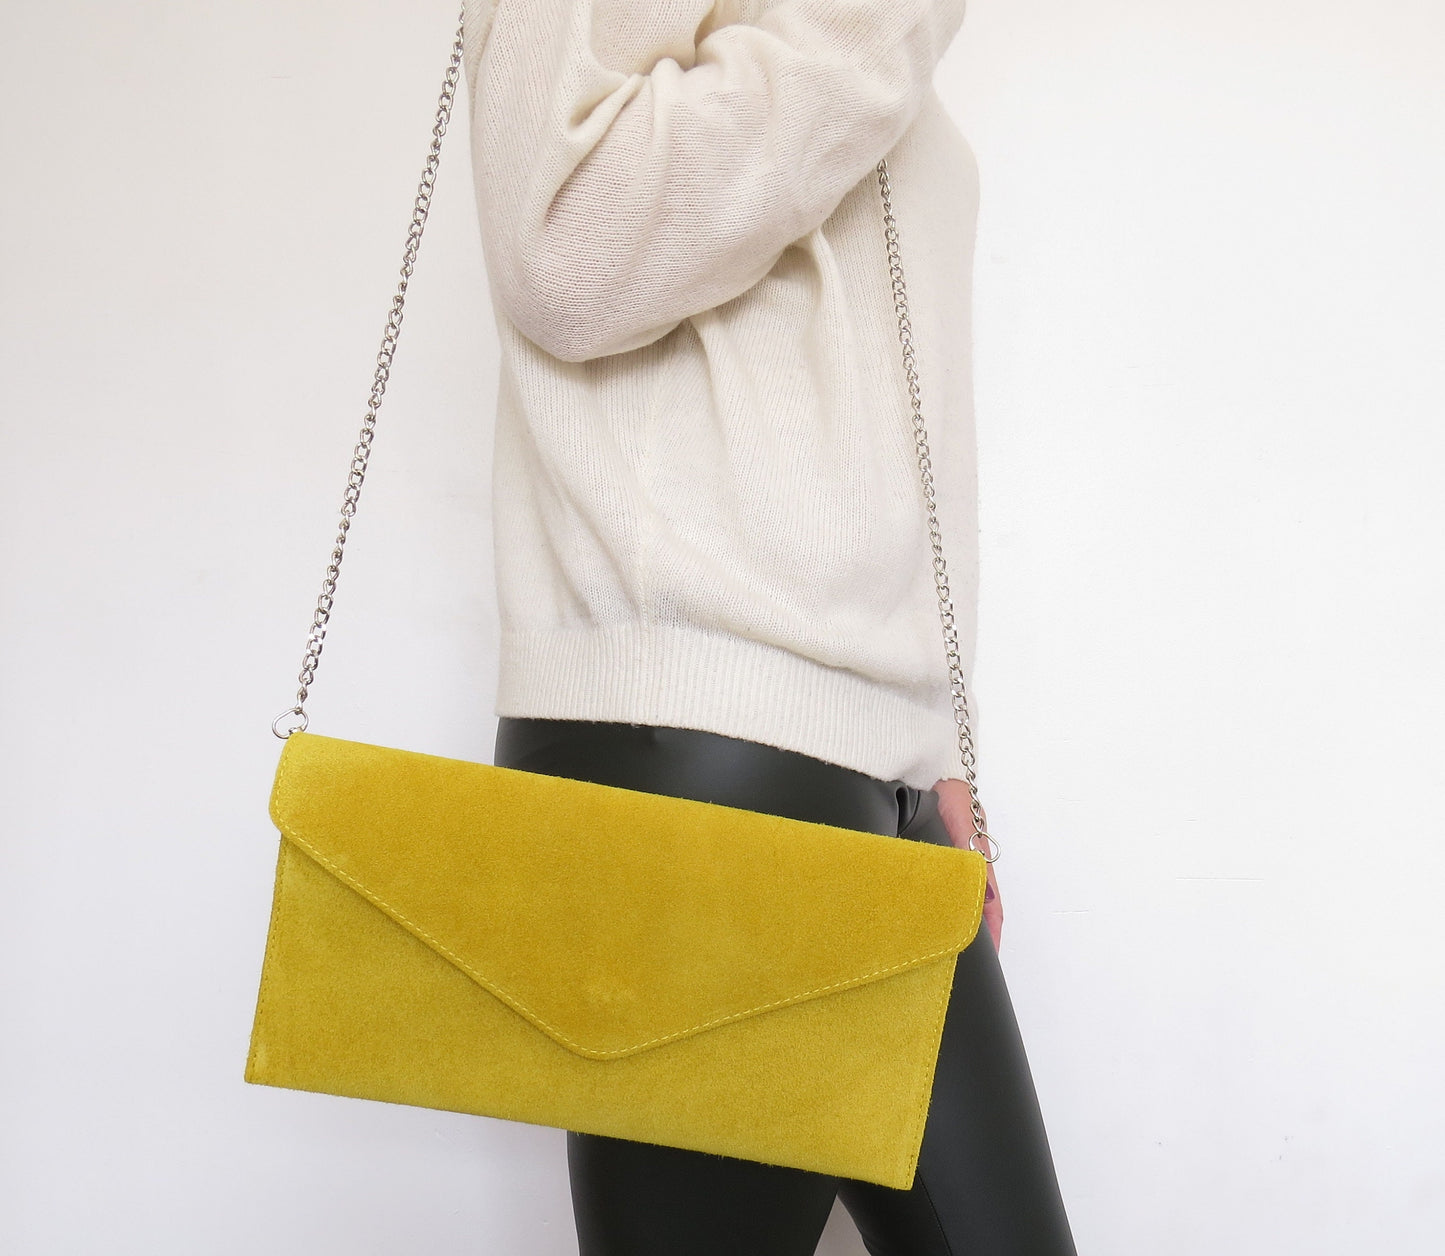 Yellow envelope clutch bag with chain shoulder strap